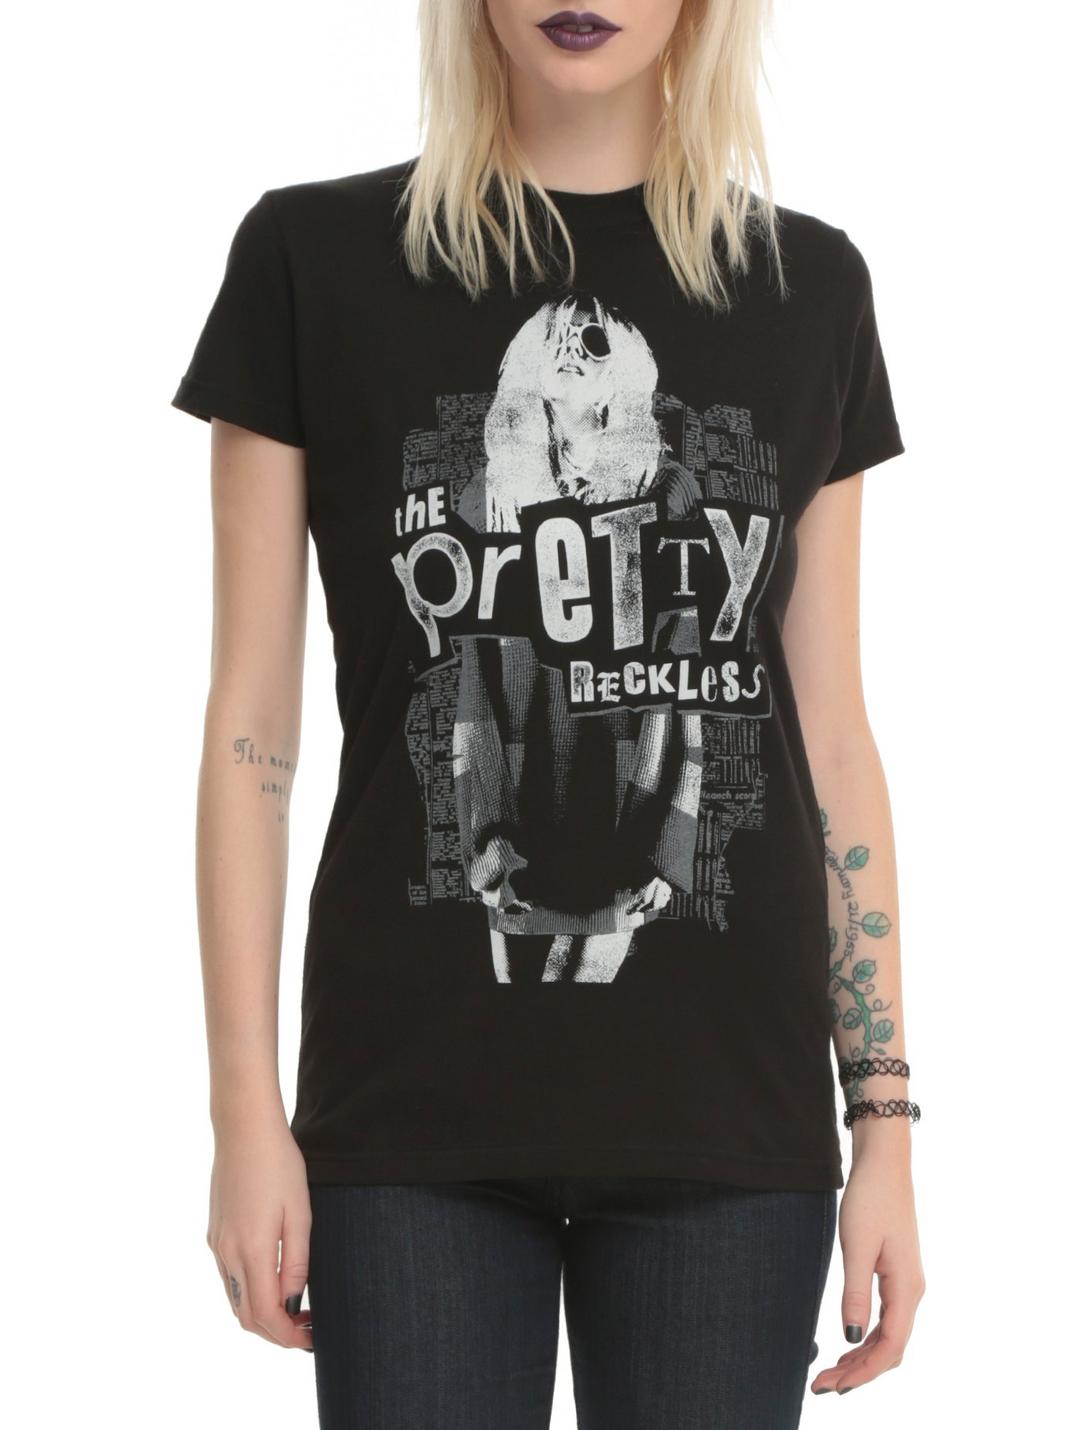 The Pretty Reckless Ransom Letter Girls T-Shirt, BLACK, hi-res